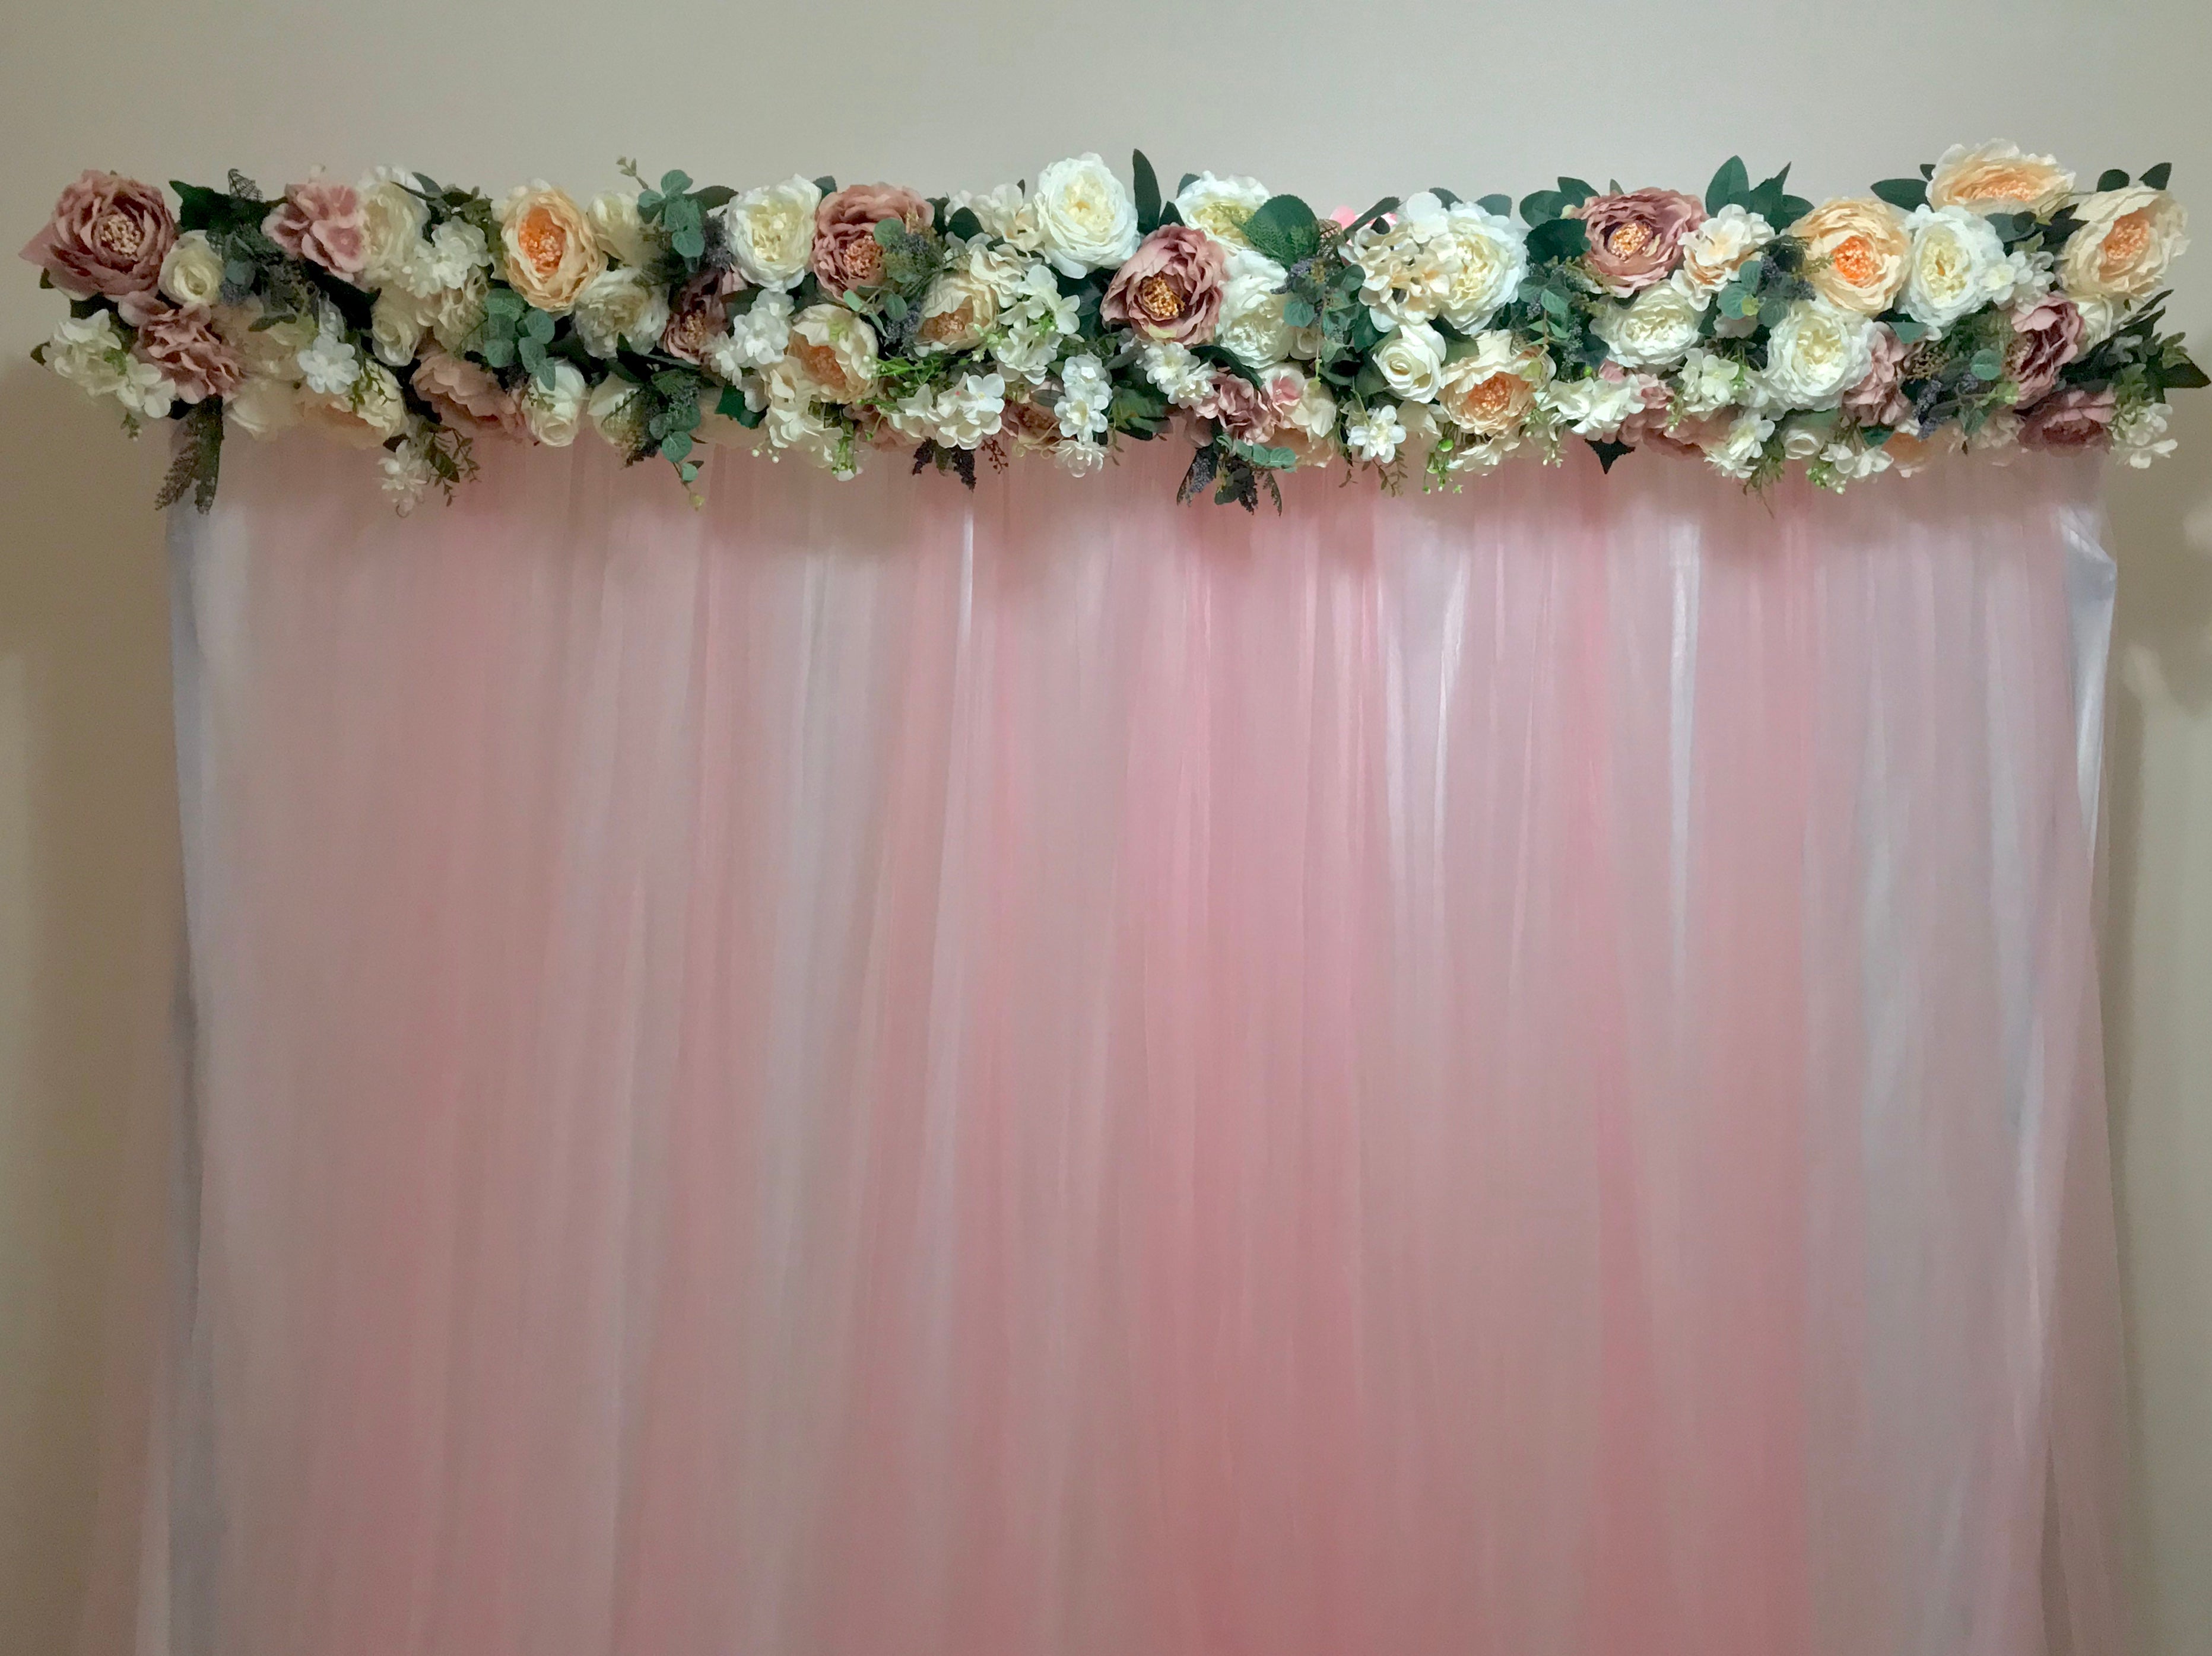 Pink Tulle Backdrop with Floral Garland and Fairylights, suitable for Birthday, Wedding, Solemnisation, Proposal